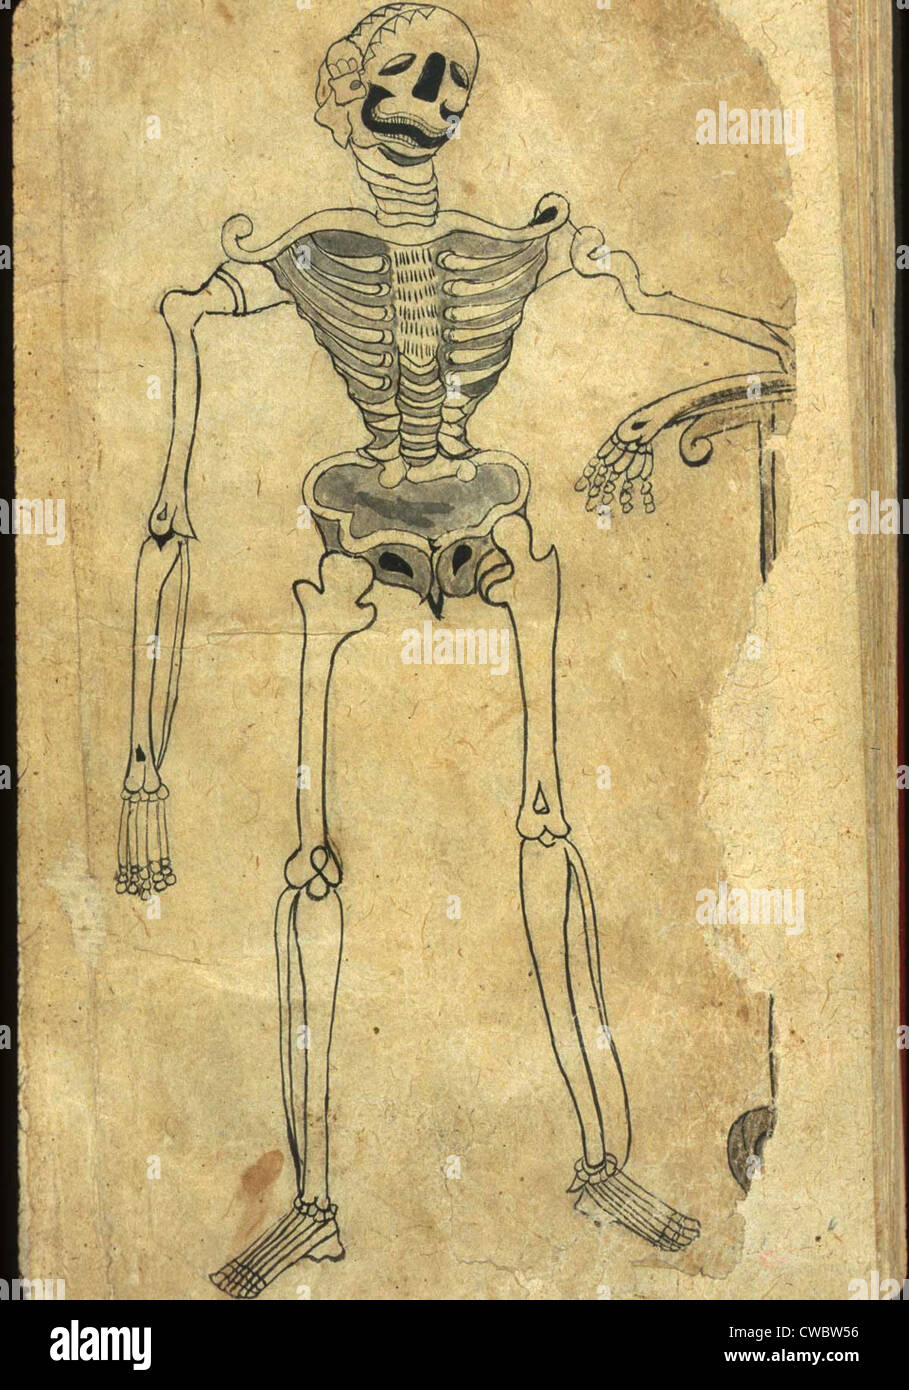 Human skeleton leaning on a scythe, drawn in ink and light-gray wash from a Persian translation of an Arabic medical book. The Stock Photo